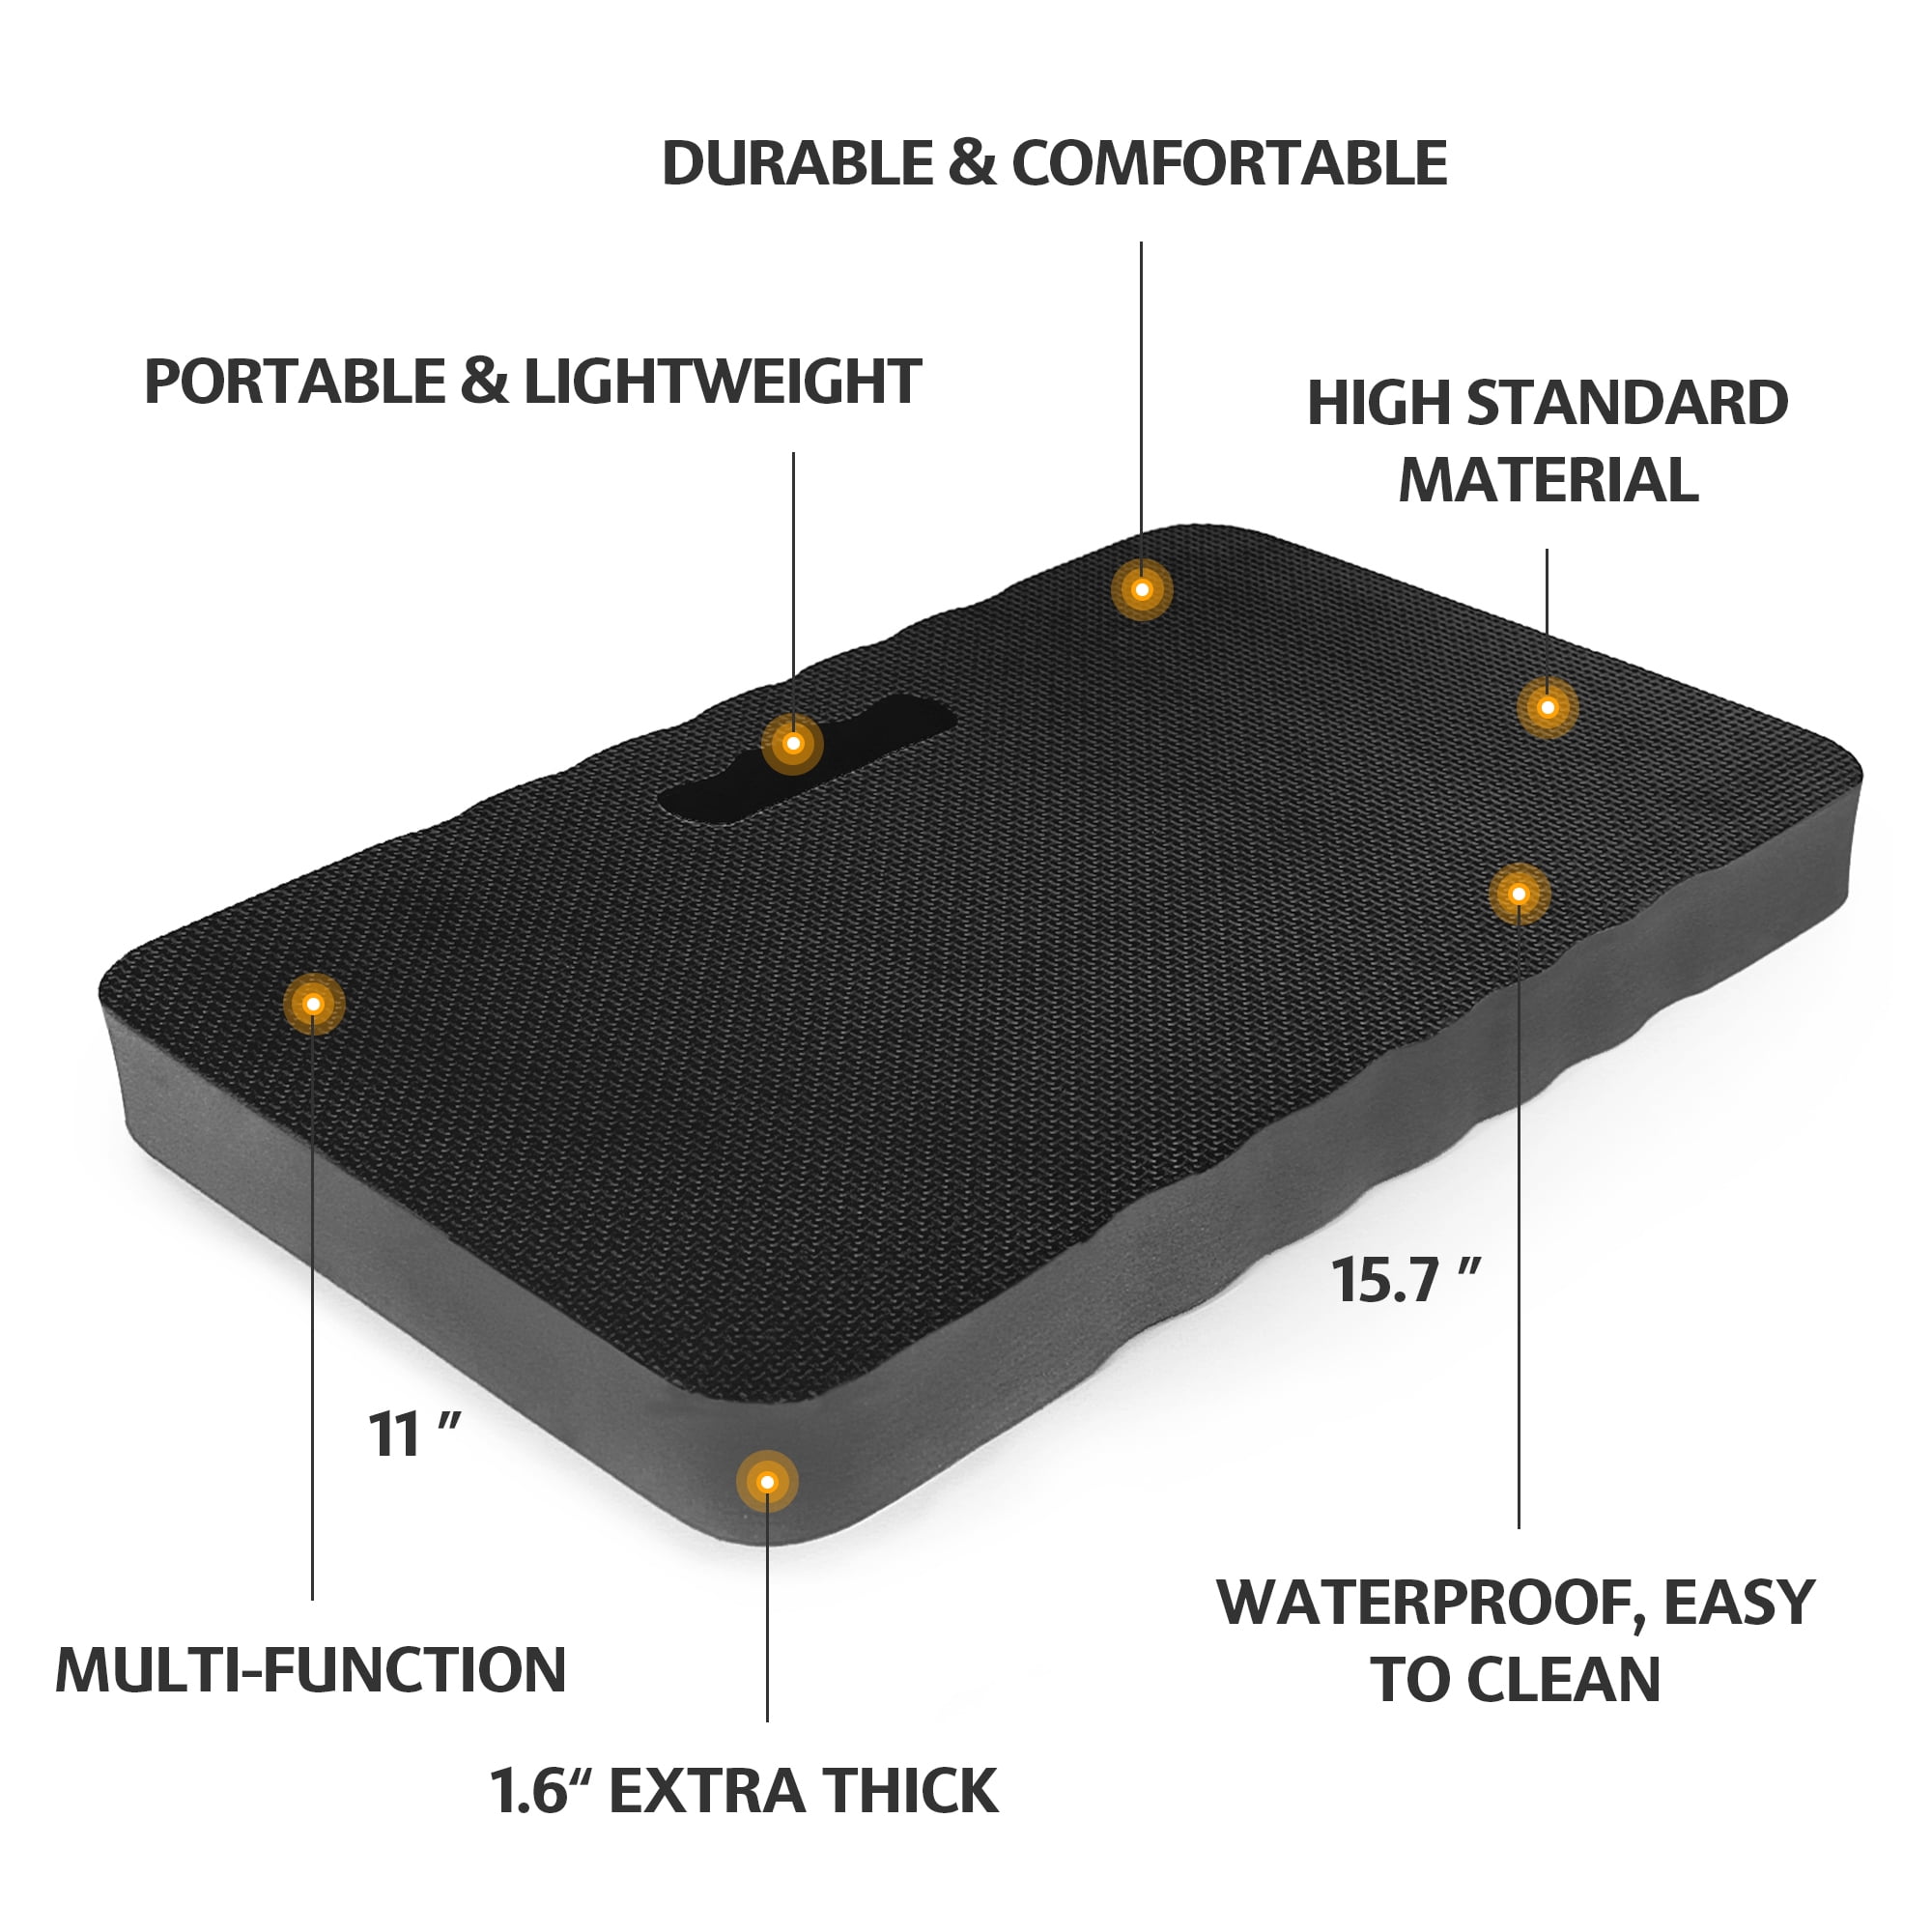 Gorilla Grip Extra Thick Kneeling Pad, Supportive Soft Foam Cushioning for  Knee, Water Resistant Construction for Gardening, Bathing Baby, Workout